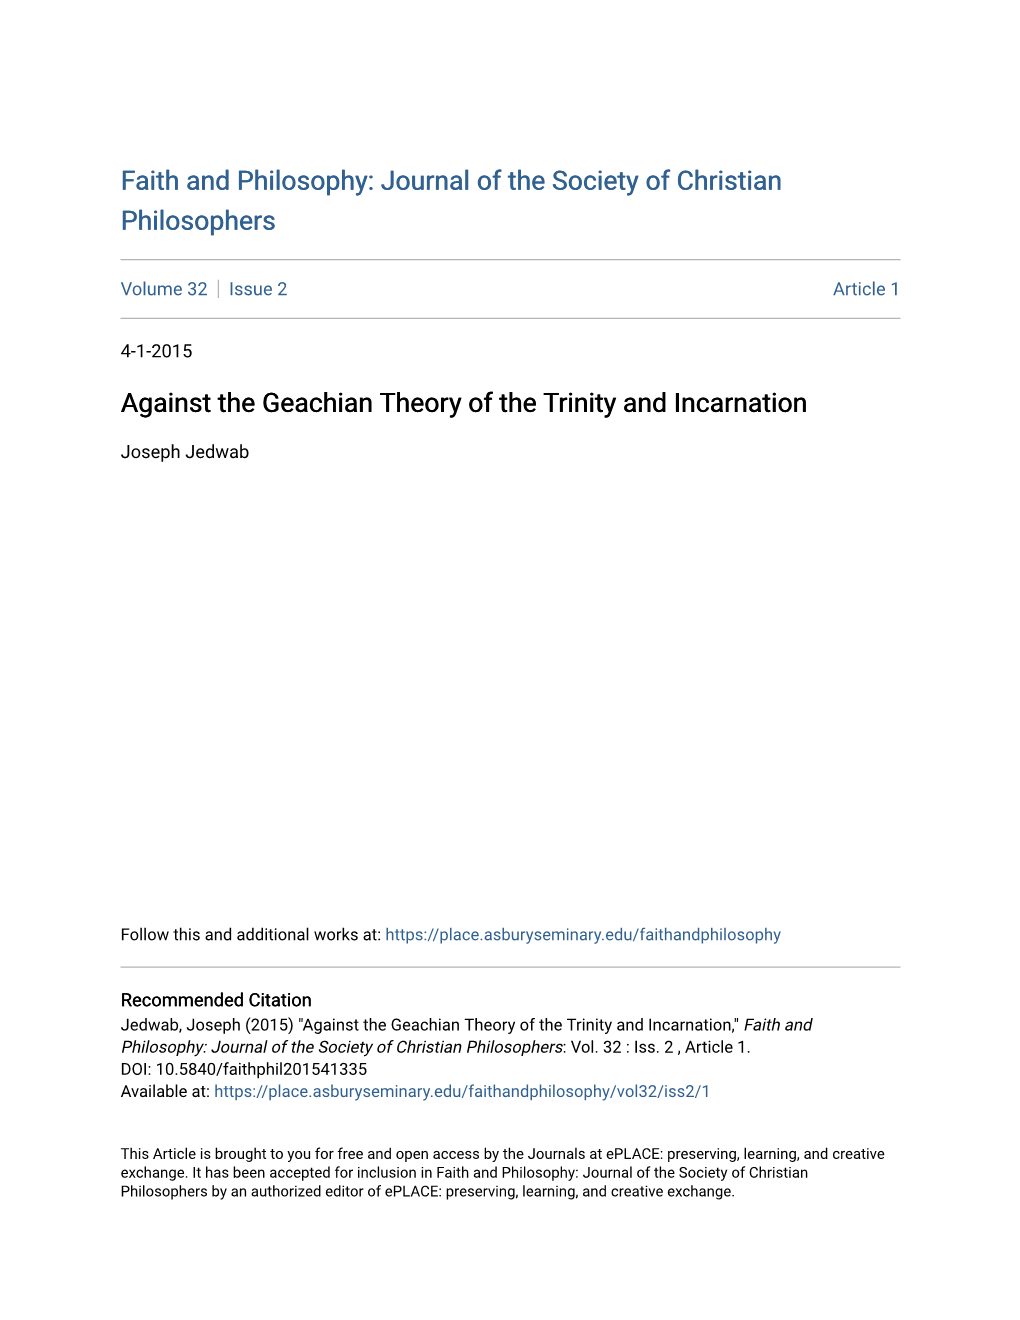 Against the Geachian Theory of the Trinity and Incarnation